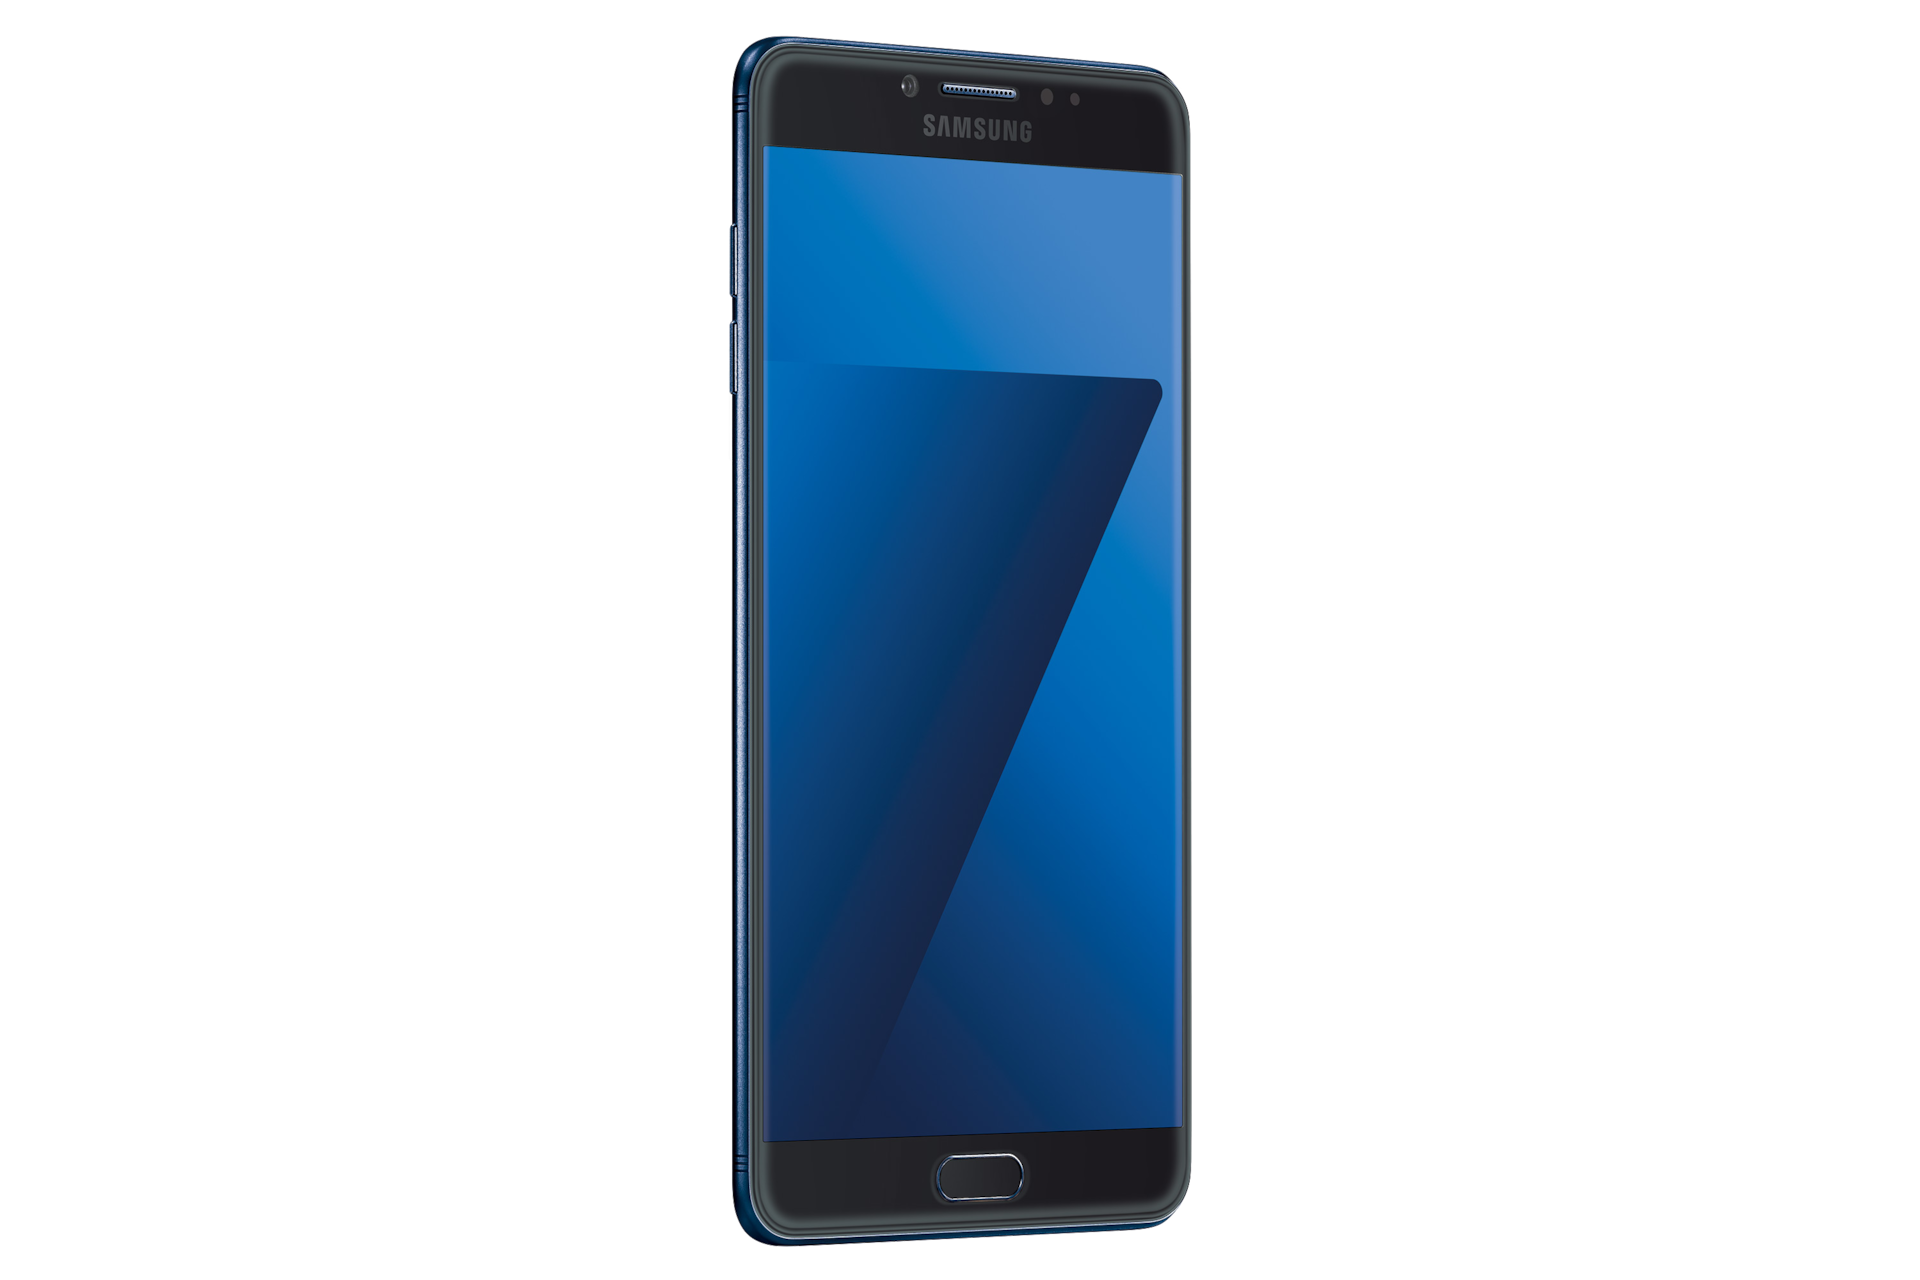 Samsung Galaxy C7 Pro  Price, Specs and Features  Samsung India